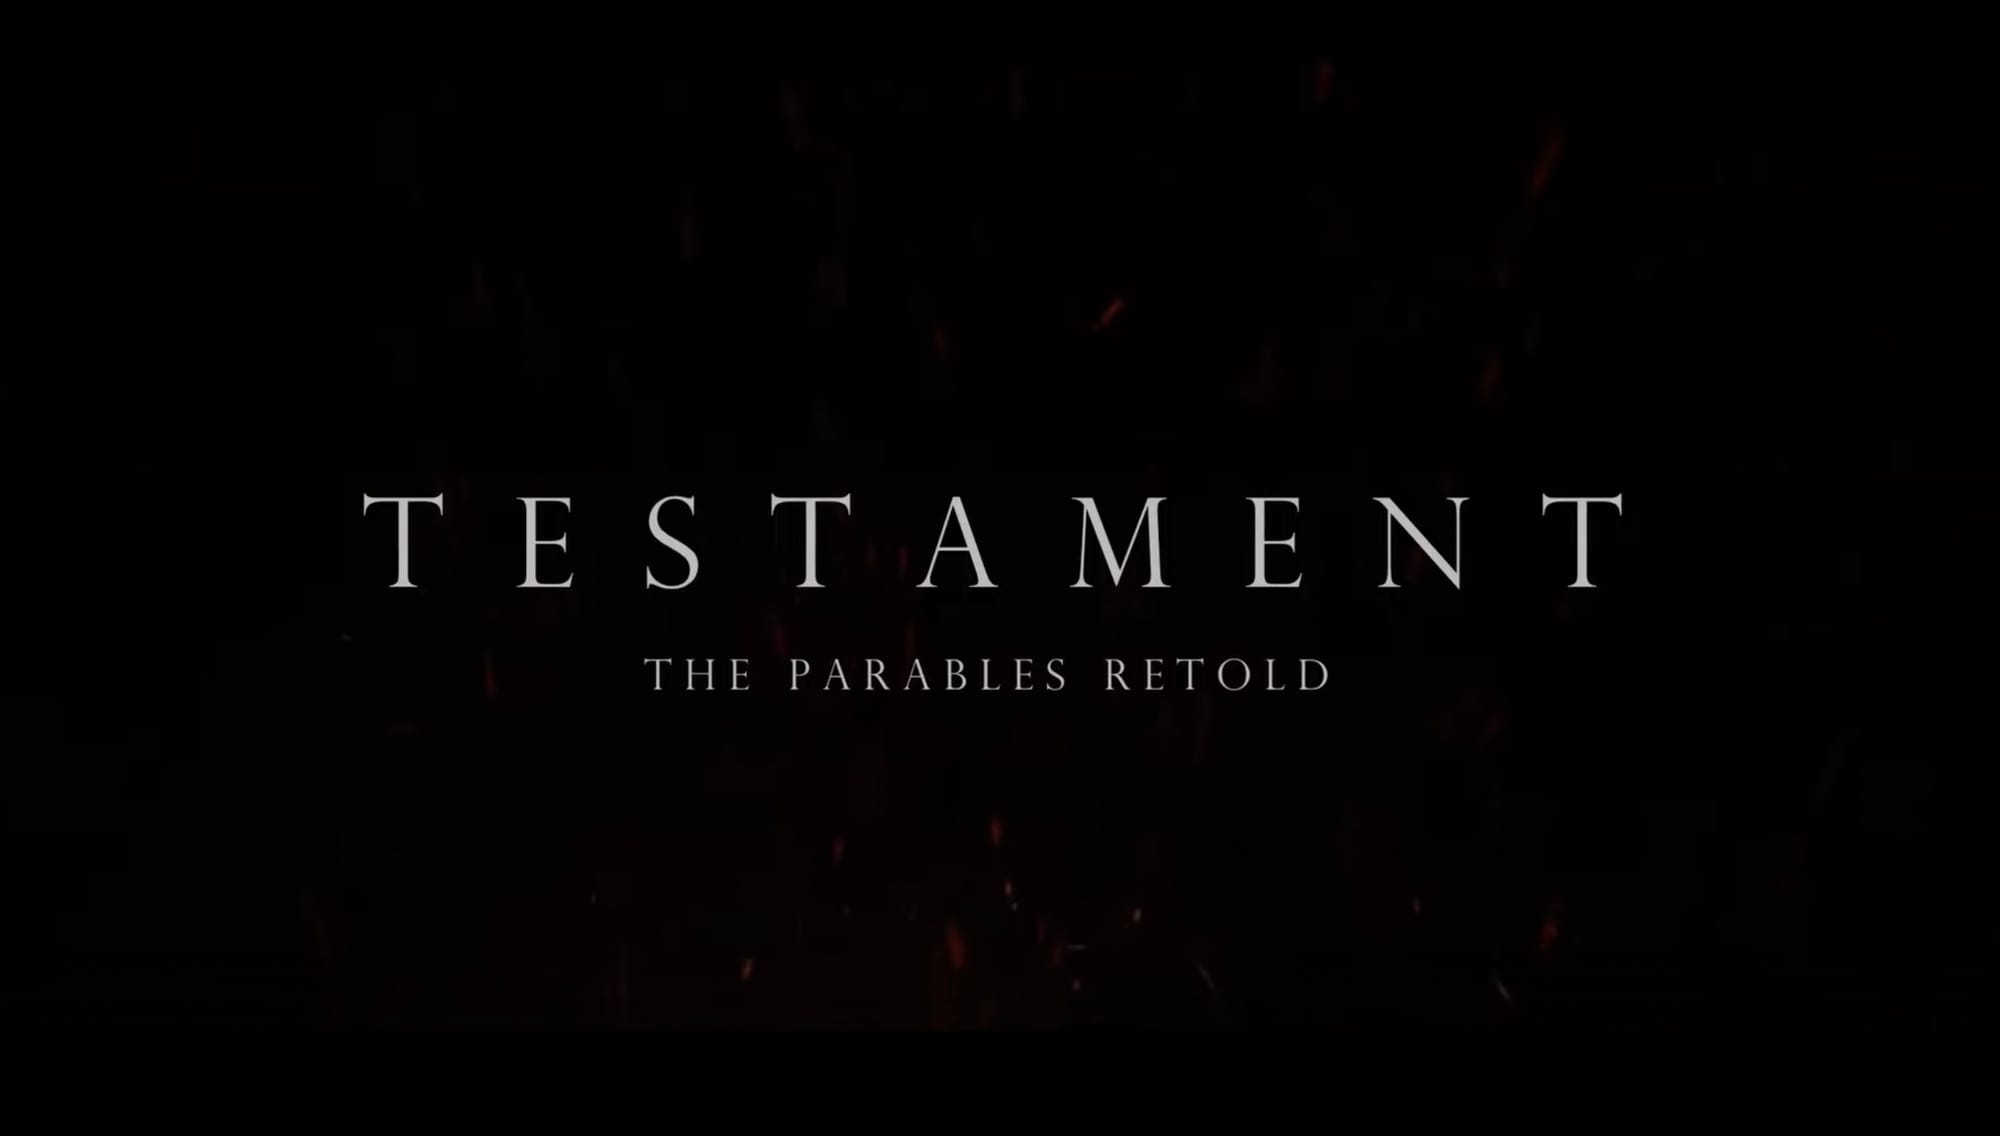 Angel's Biblical Series "Testament" Touts Interesting World-Building Based in an Alternate Reality